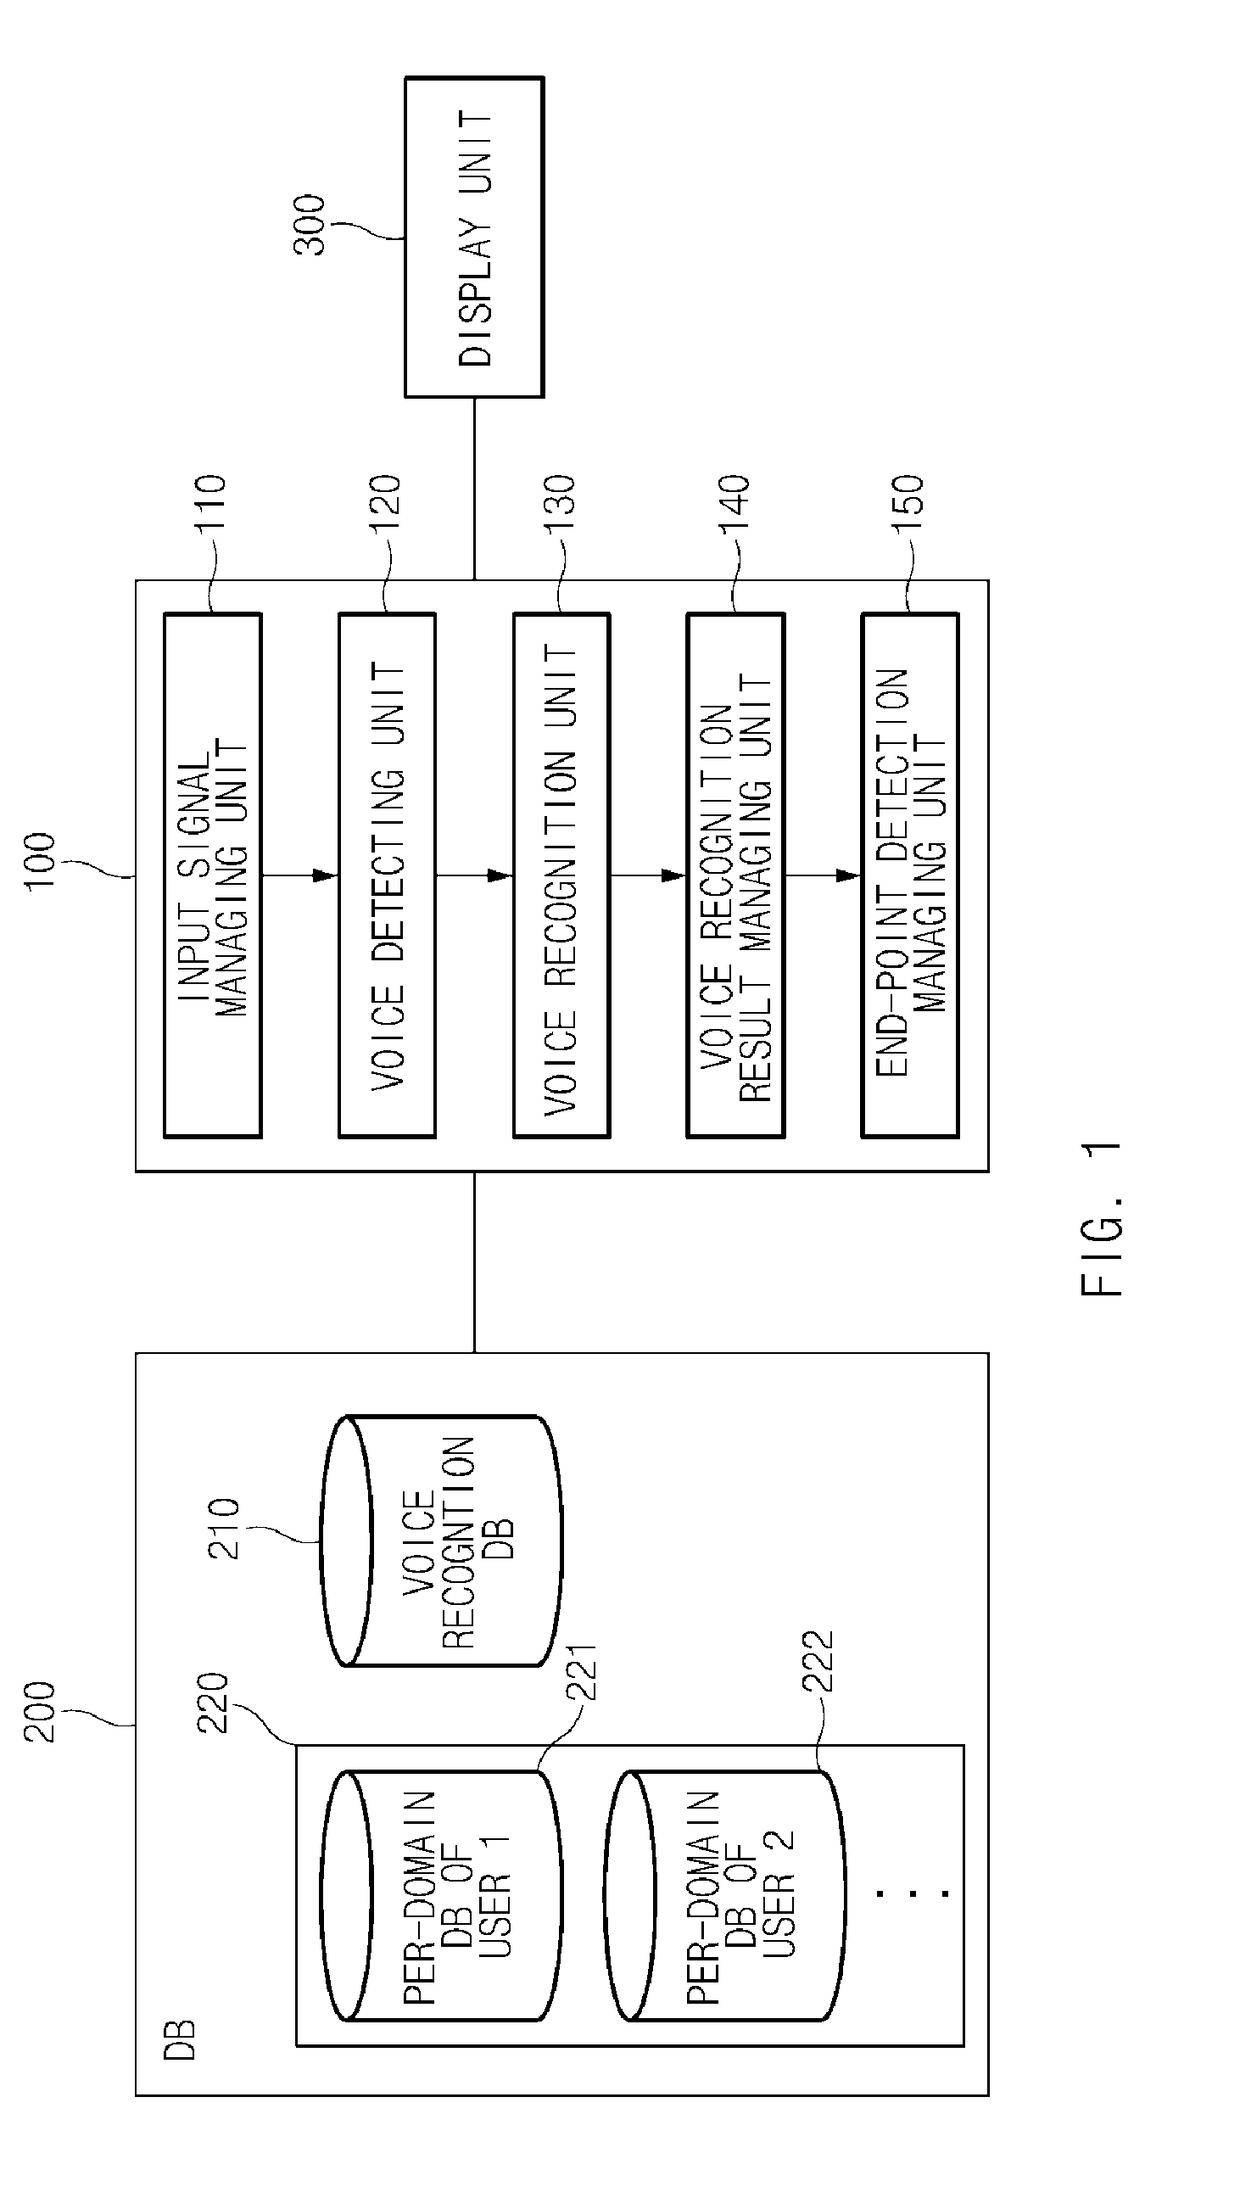 Voice end-point detection device, system and method